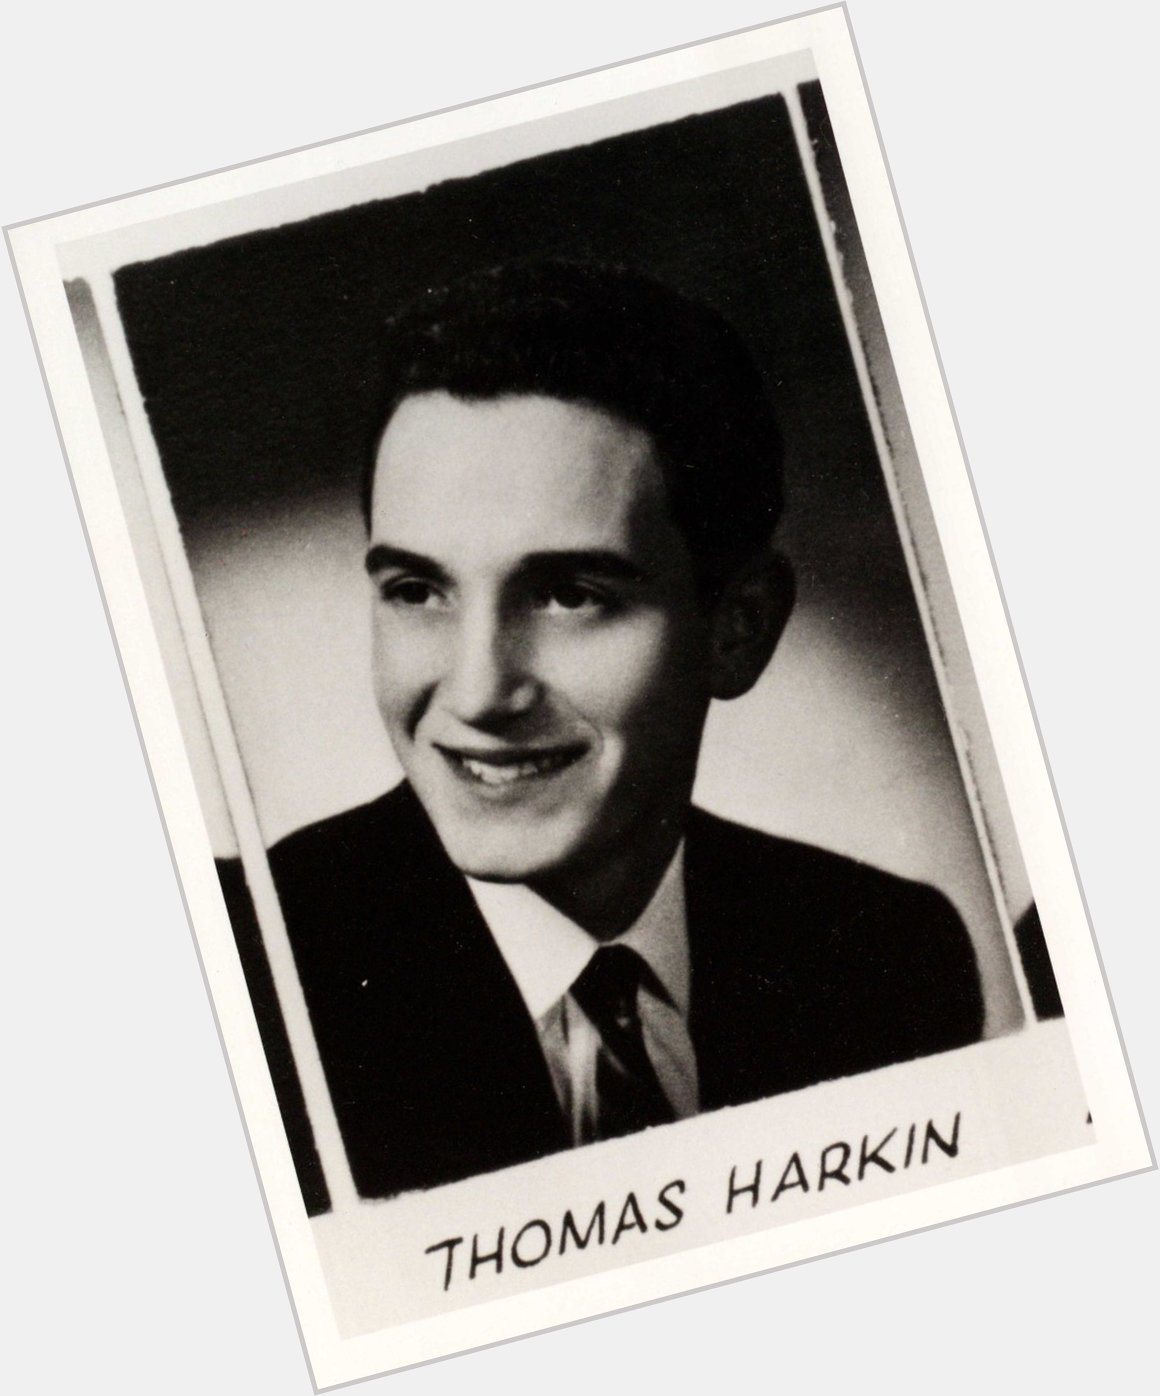 Happy Birthday to Senator Tom Harkin! For more info on his archival collection visit:  